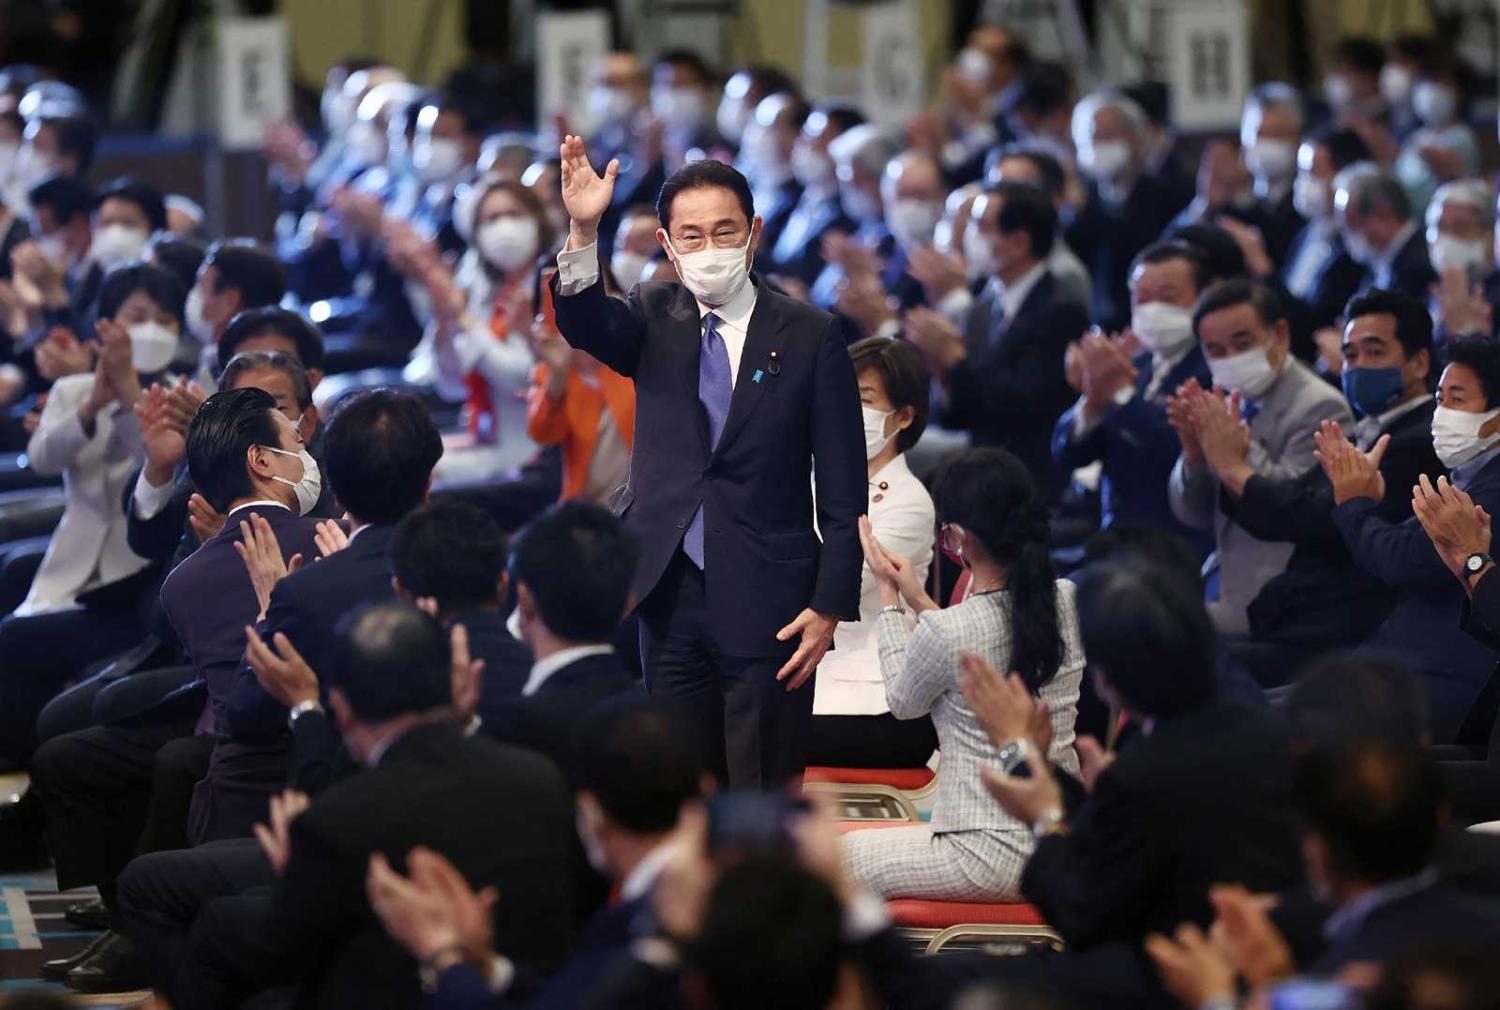 Fumio Kishida after being elected as the new president at the LDP election in Tokyo, 29 September 2021 (STR/Jiji Press/AFP via Getty Images)